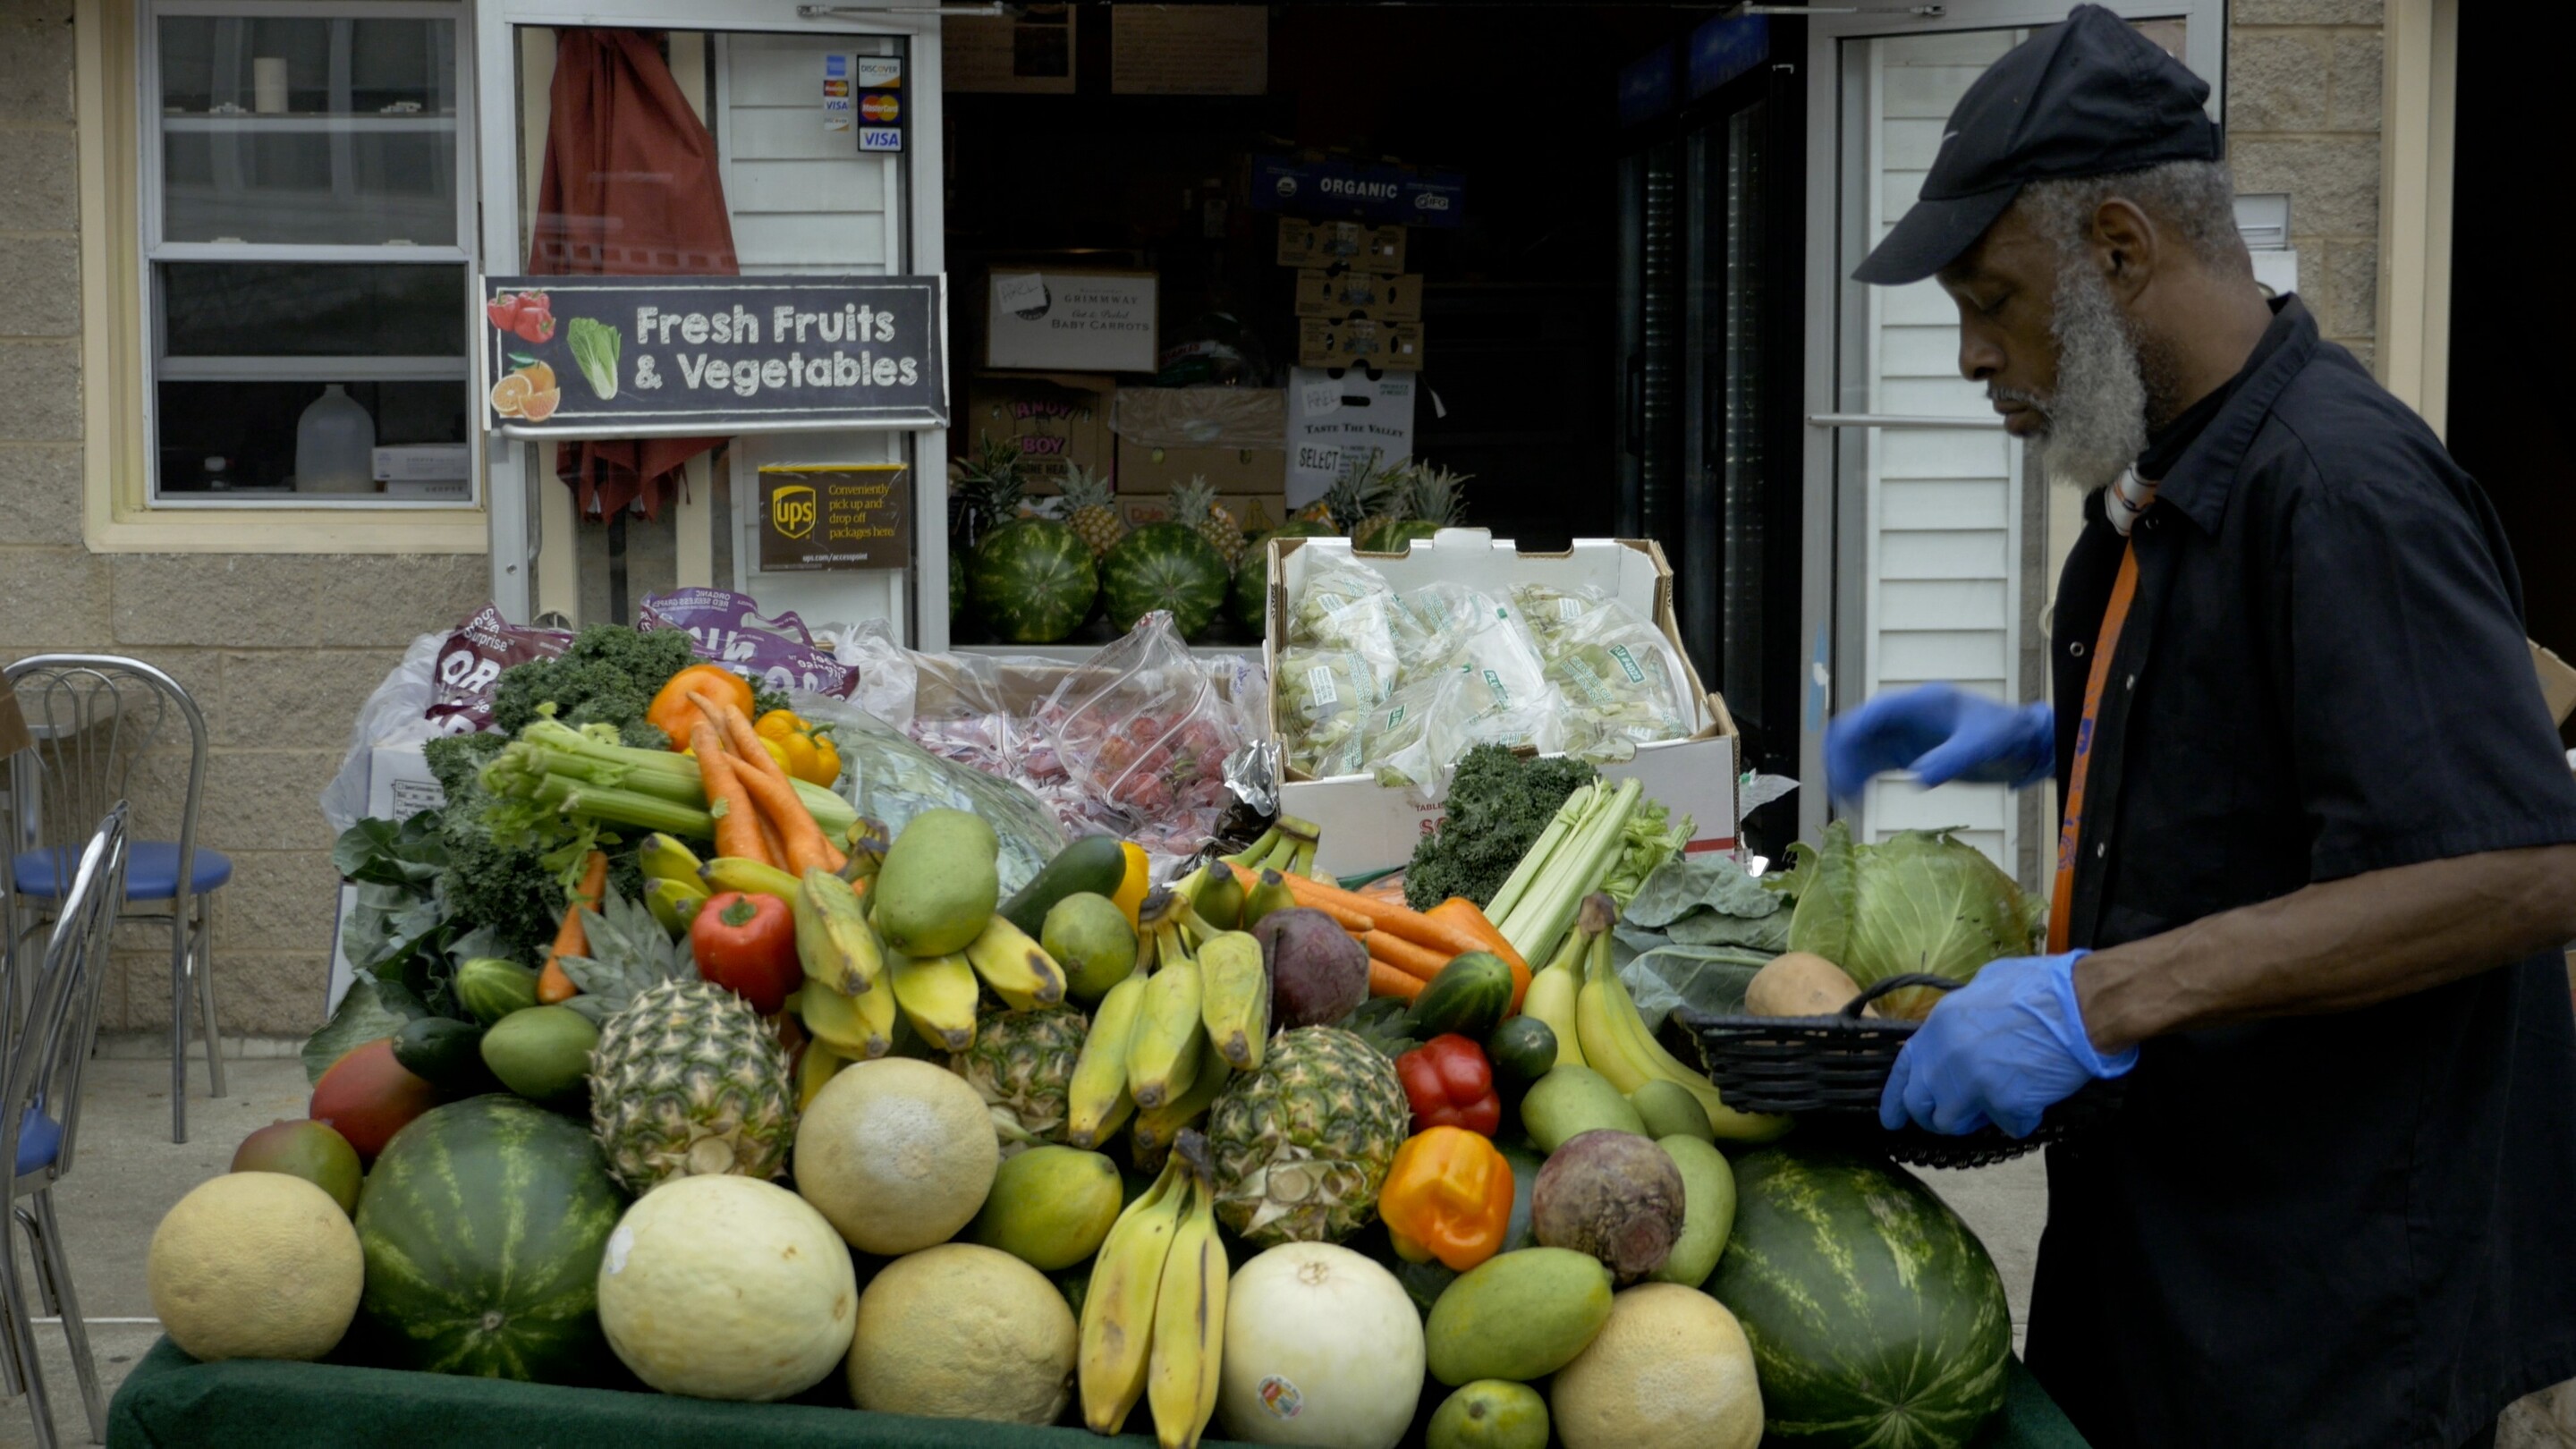 Increasing Food Access & Affordability for Americans